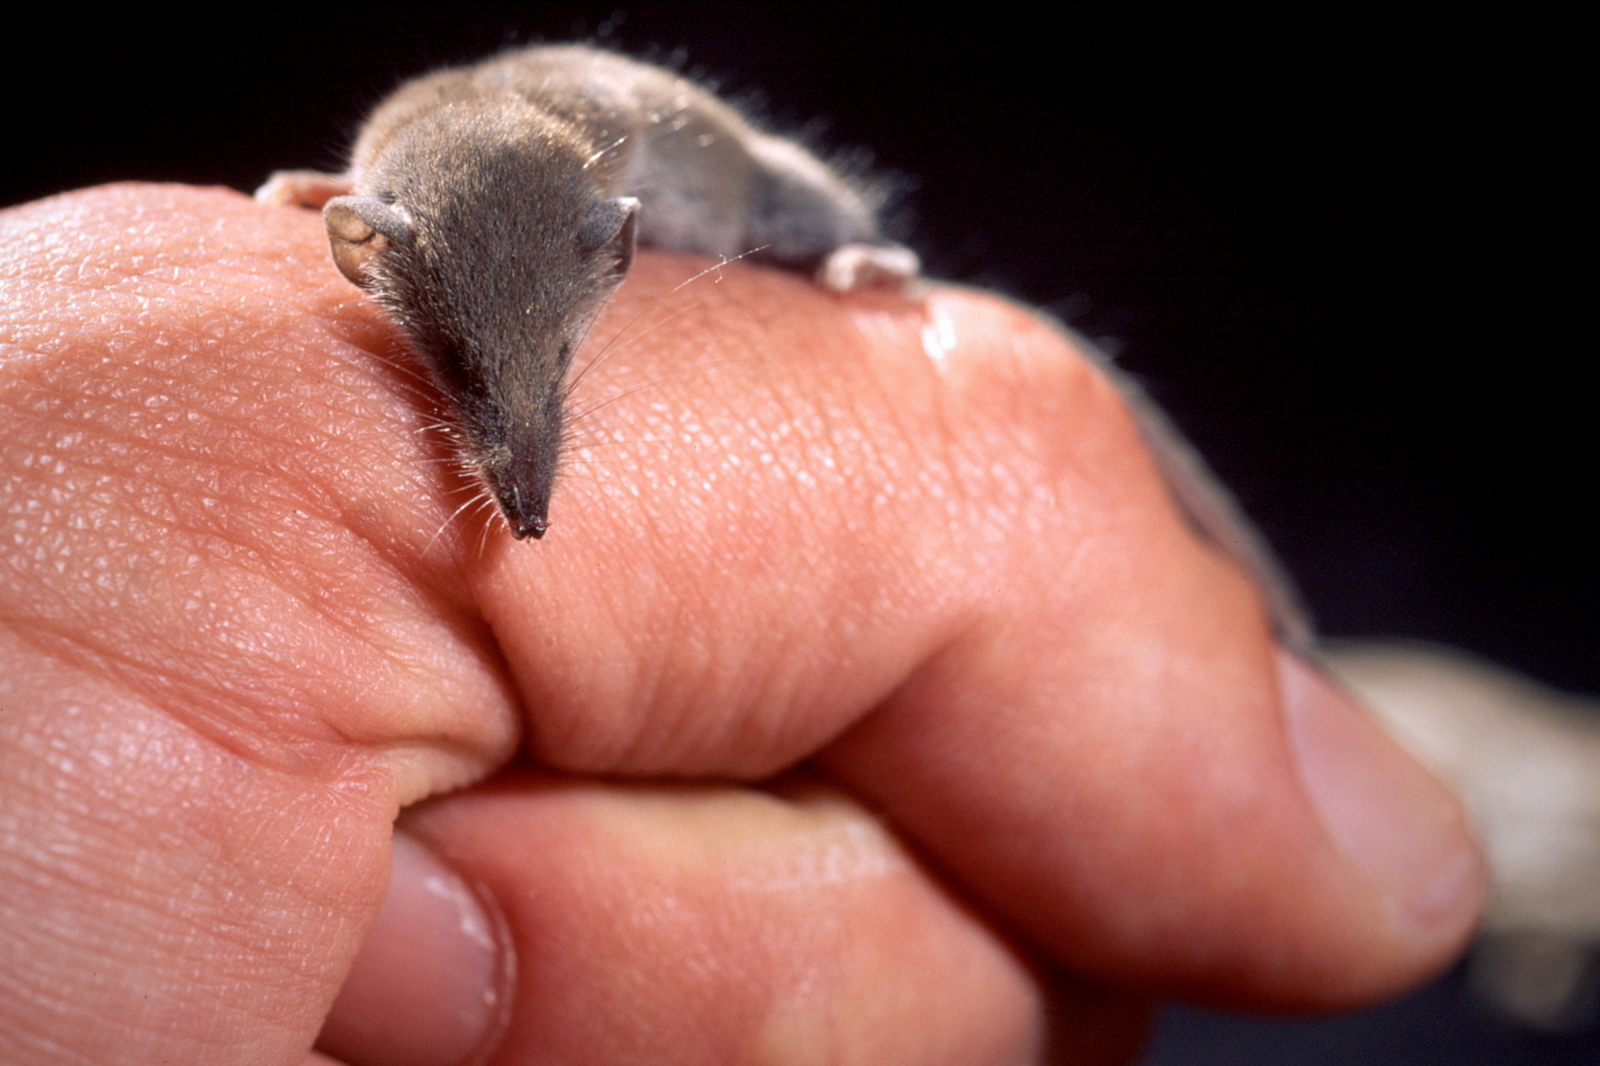 What is the smallest mammal in the world where does it come from?